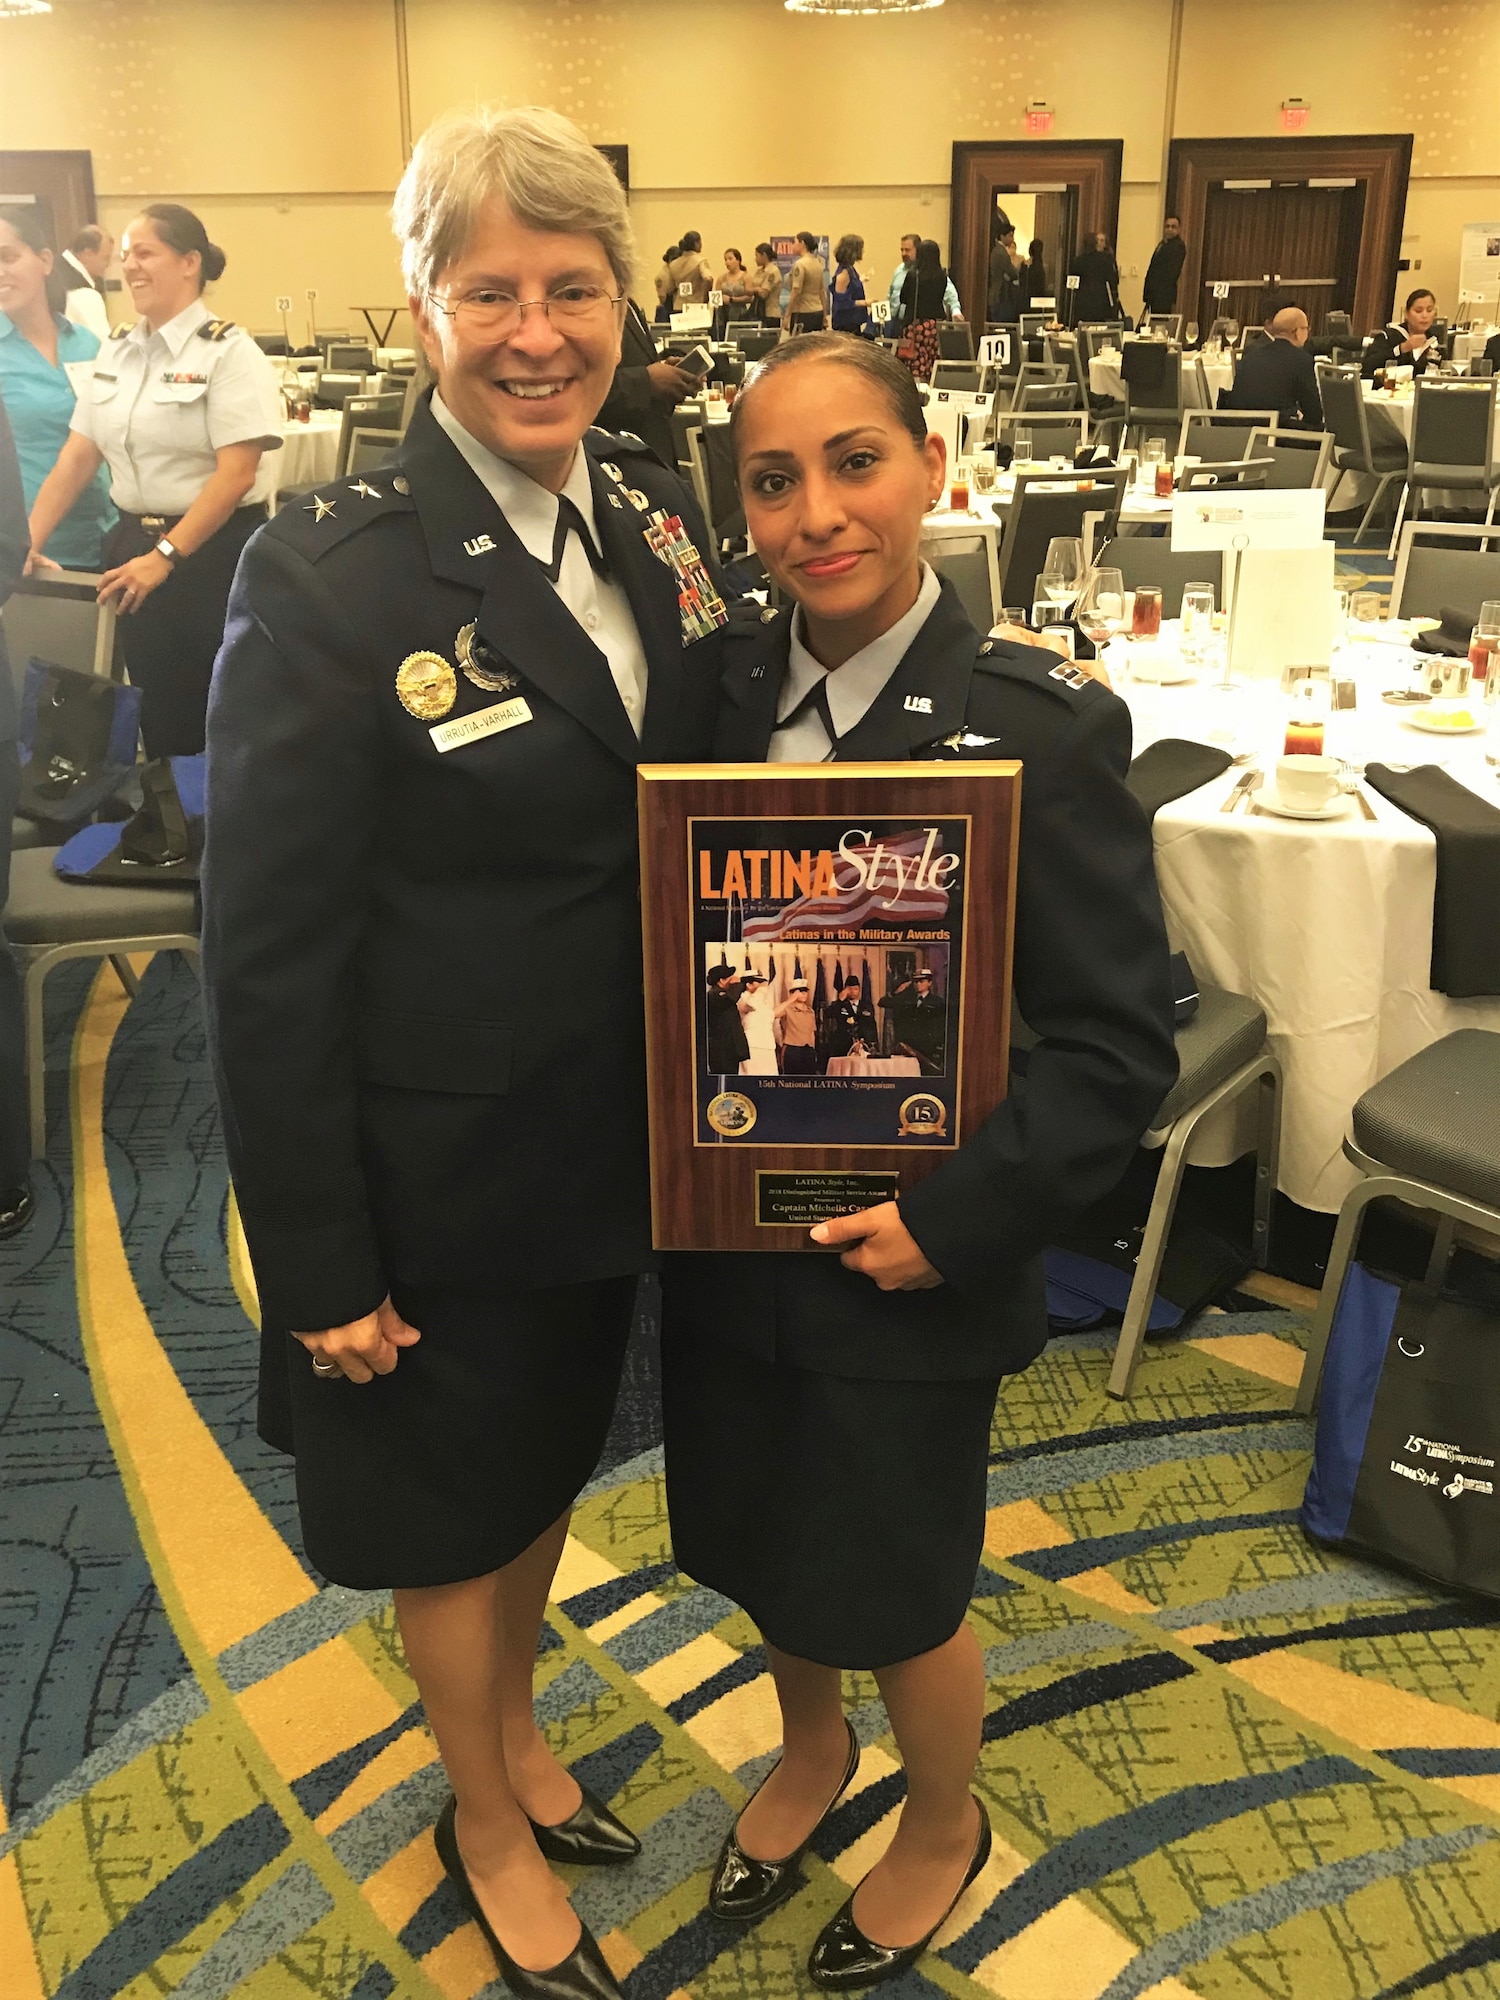 Airmen poses for a photo with Maj. Gen. Linda R. Urrutia-Varhall, the Director of Operations at the National Geospatial-Intelligence Agency.